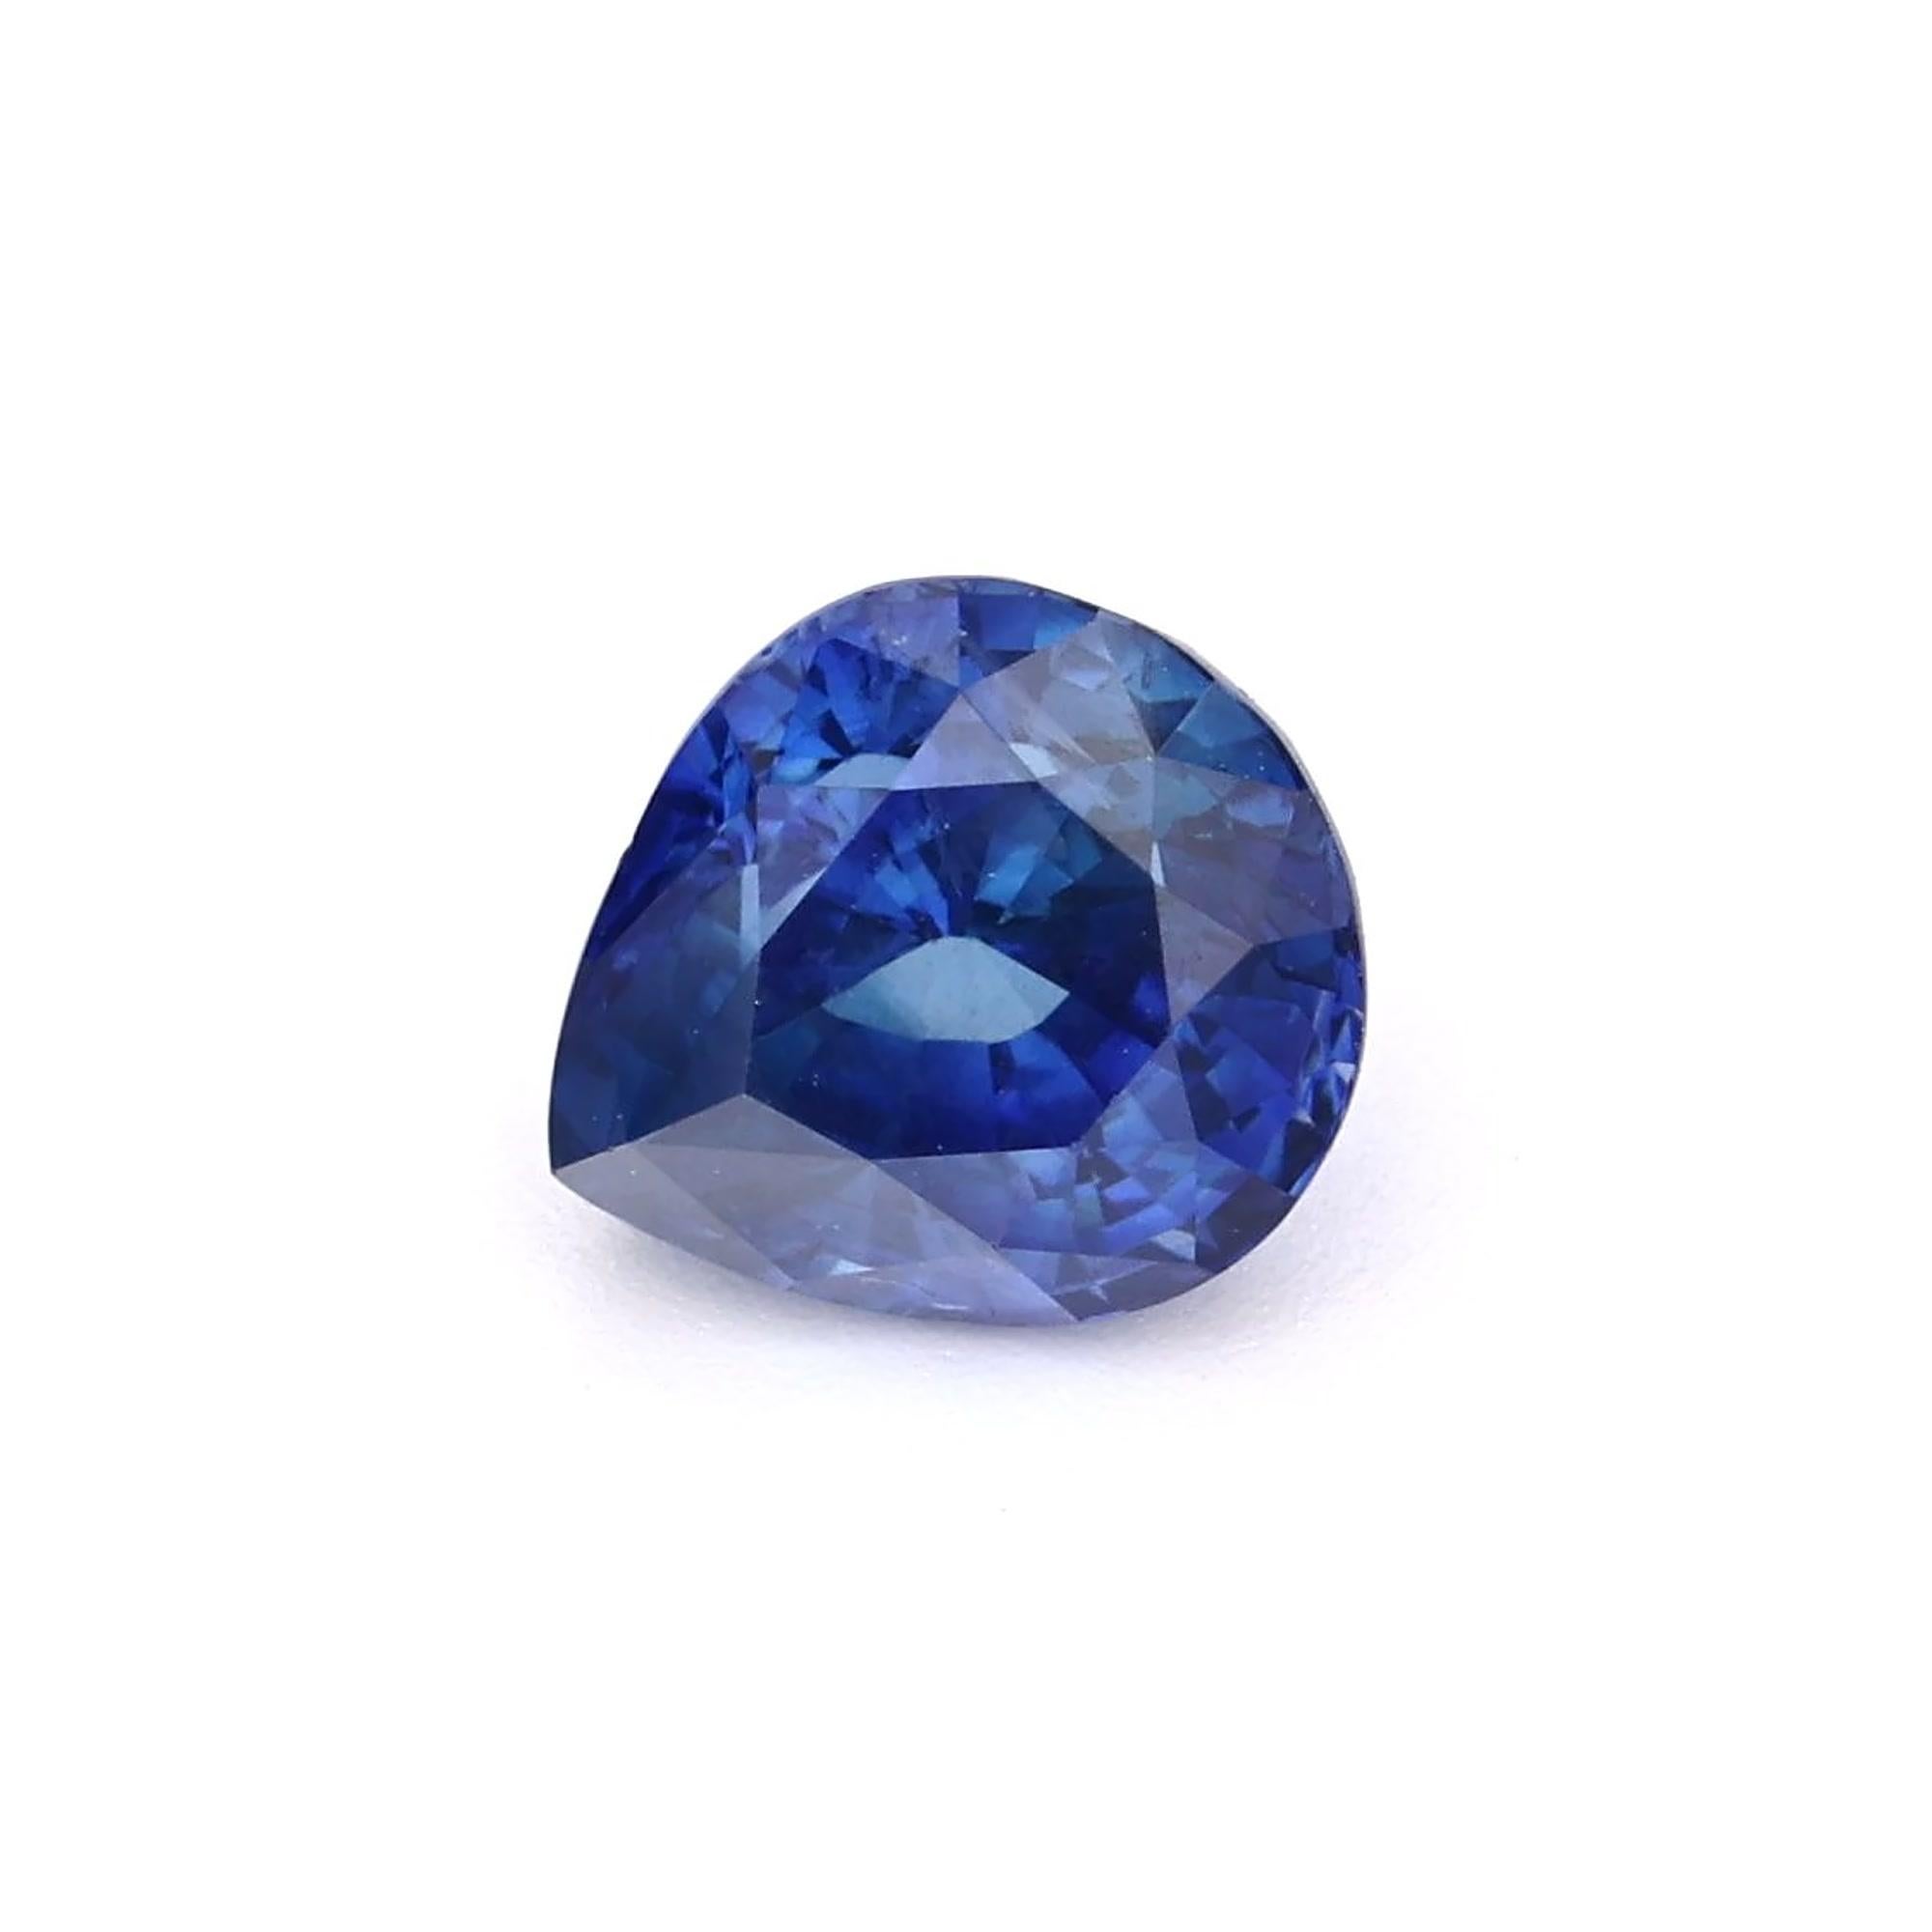 Natural Blue Sapphire Vivid Blue, This exquisite gemstone originates from Ceylon (Sri Lanka), known for producing exceptional quality stones. With its internally flawless clarity.

• Variety: Blue Sapphire 
• Origin: Sri Lanka (Ceylon)
• Color(s):